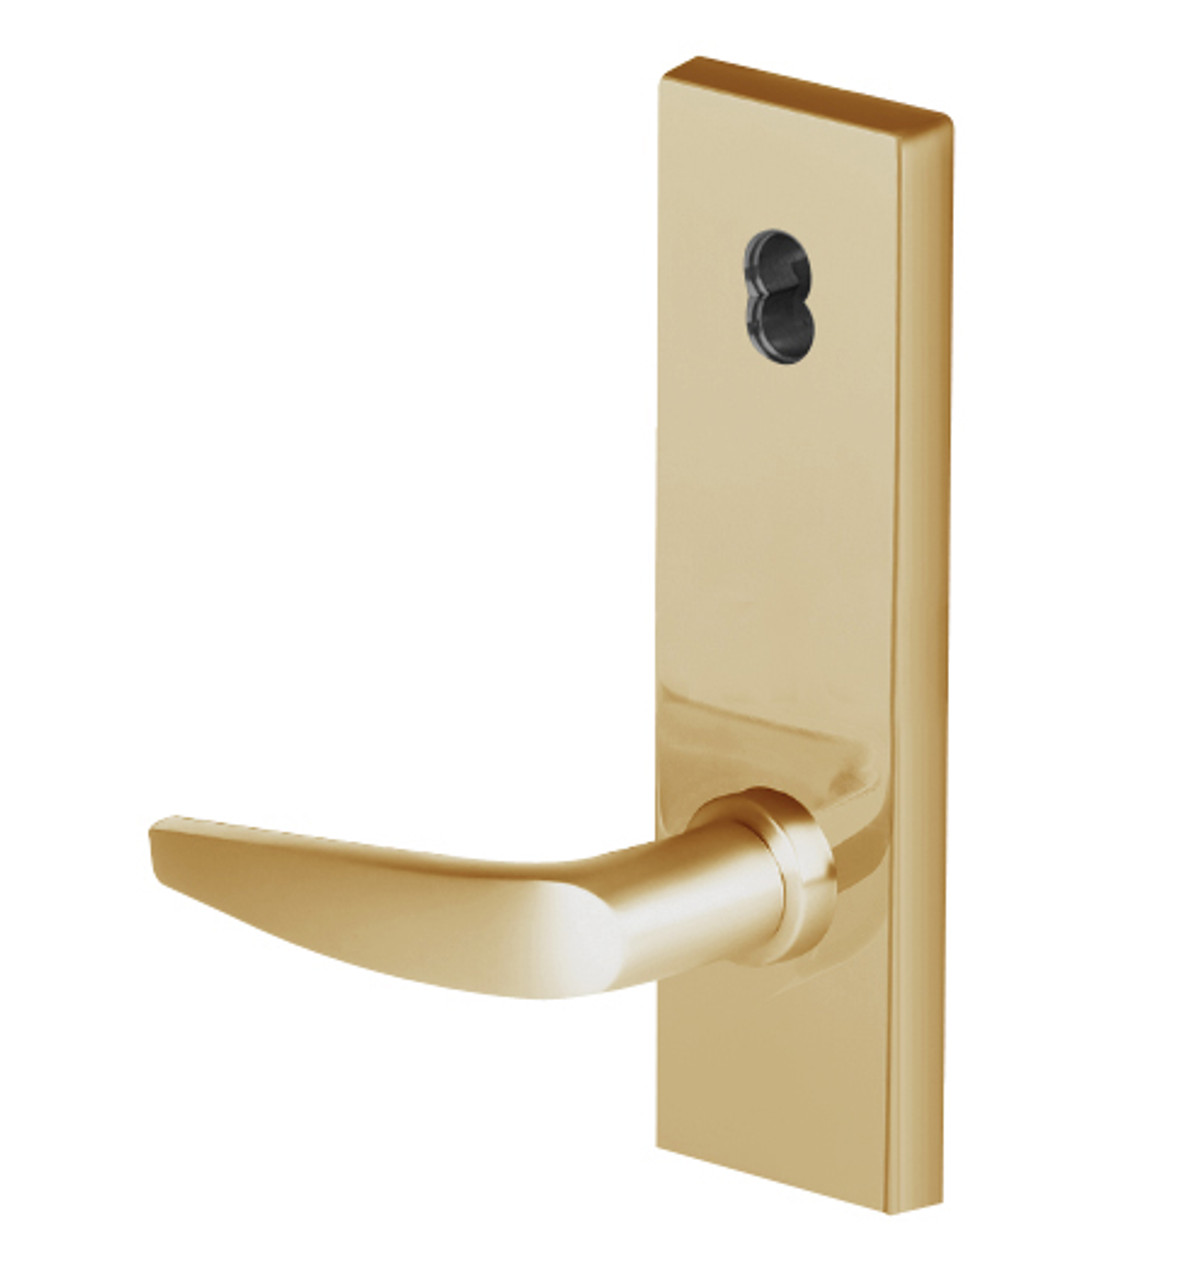 45HW7TWEU16N606 Best 40HW series Double Key Deadbolt Fail Secure Electromechanical Mortise Lever Lock with Curved w/ No Return Style in Satin Brass